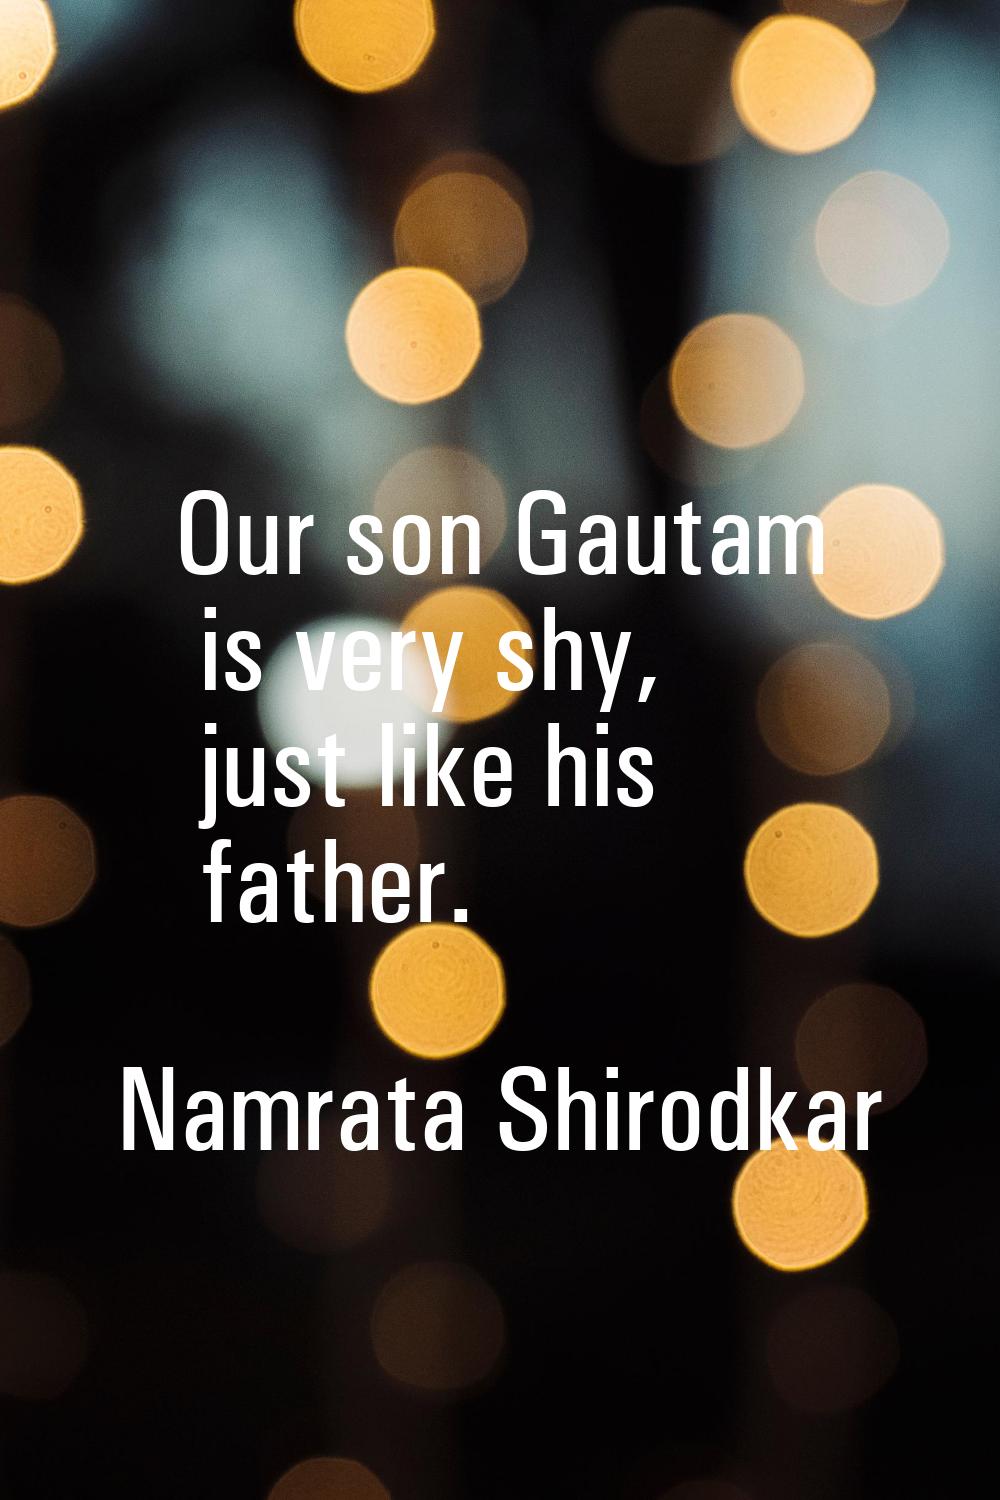 Our son Gautam is very shy, just like his father.